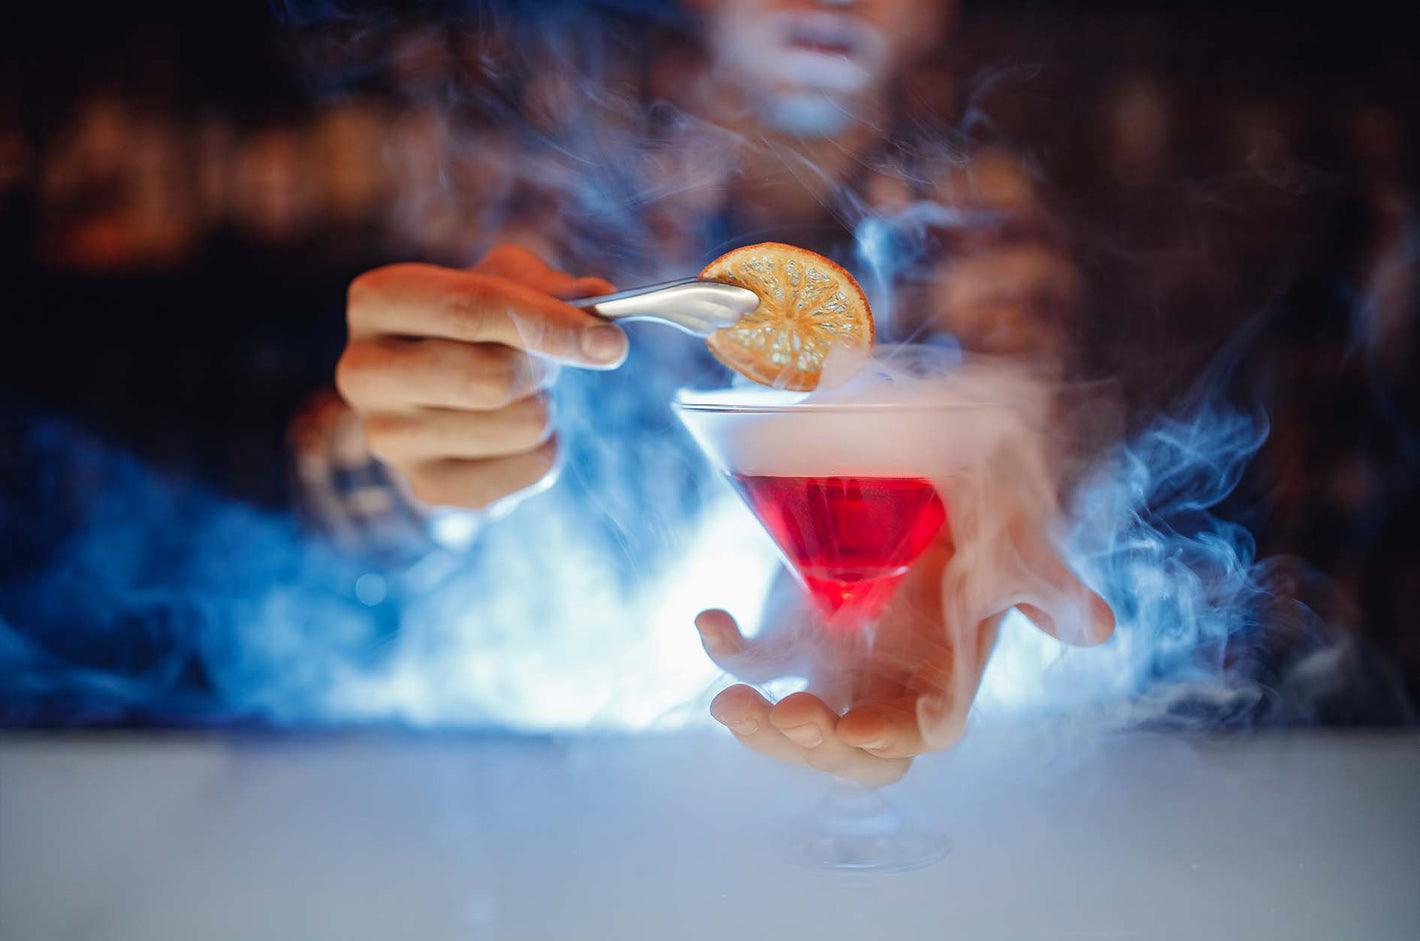 With our American Cherry smoker, smoke dusts, and torch, you'll be able to make the best smoked whiskey drinks ever. Start exploring a new world of flavor possibilities and buy now!